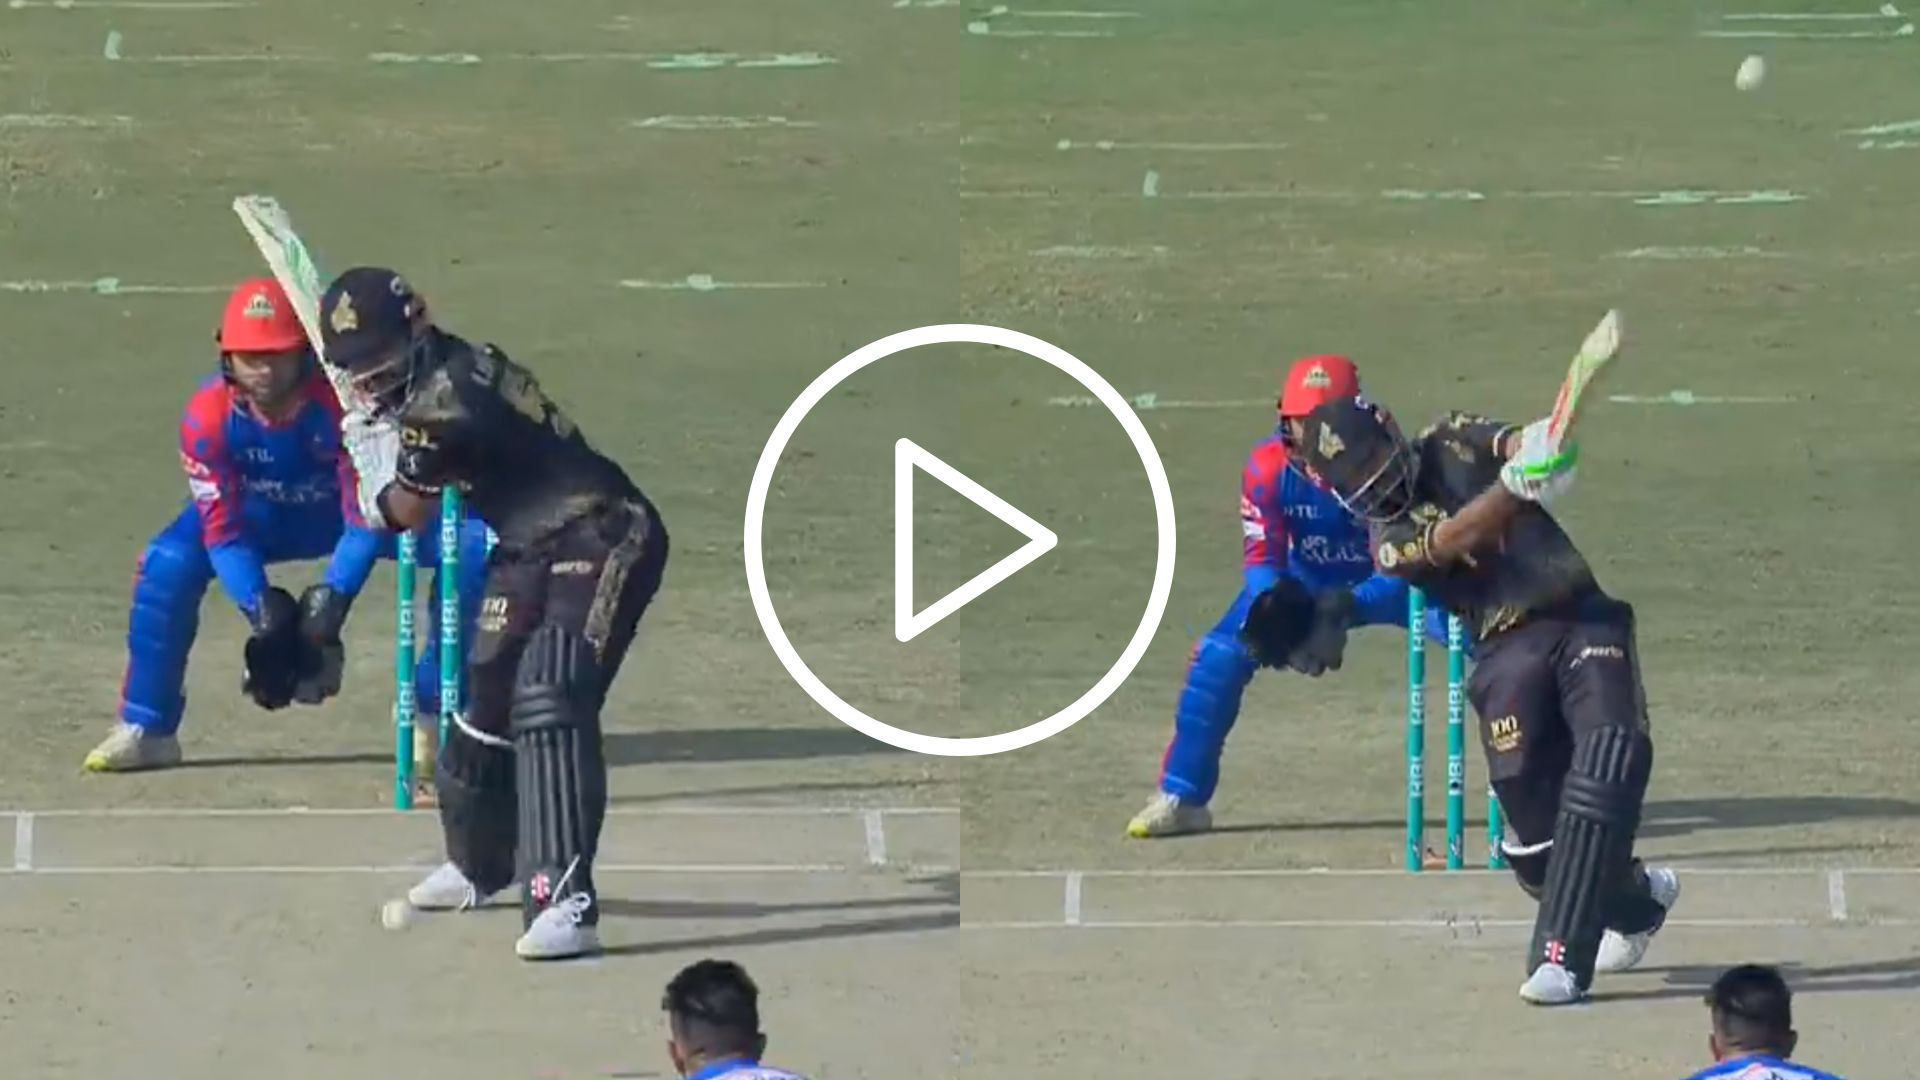 [Watch] Babar Azam Completes Scintillating Fifty With A Huge Six vs Karachi Kings